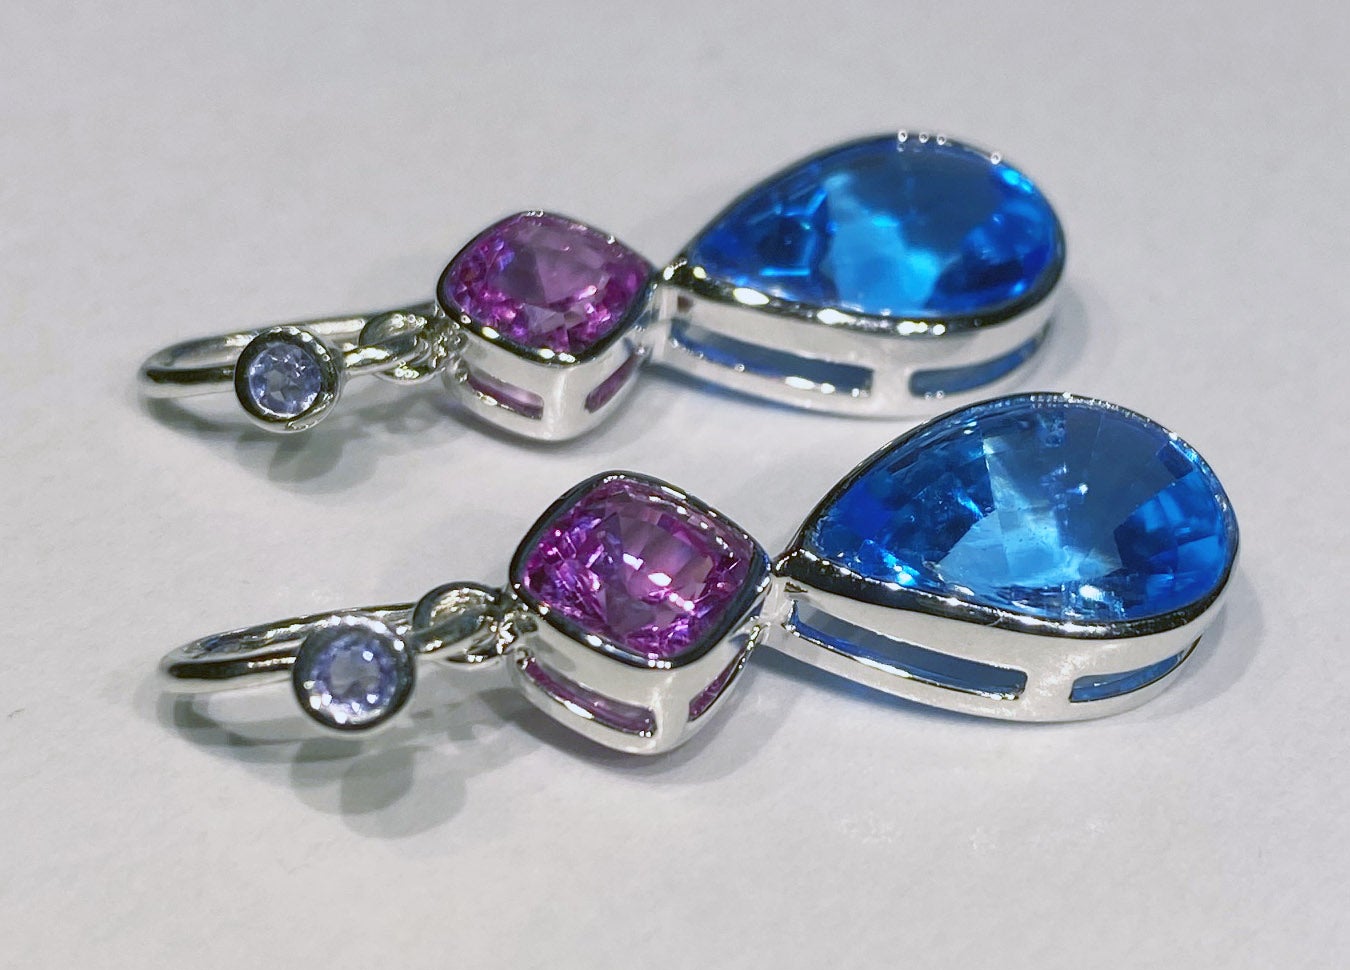 18kt White Gold  Earrings set with Tanzanite, Blue Topaz & Cultured Pink Sapphires. 18kt White Gold weight is 5.3 Grams, Earring French Hooks are Silver, body of earings are 18kt White Gold. Two small Tanzanite rounds accent the silver French Hooks